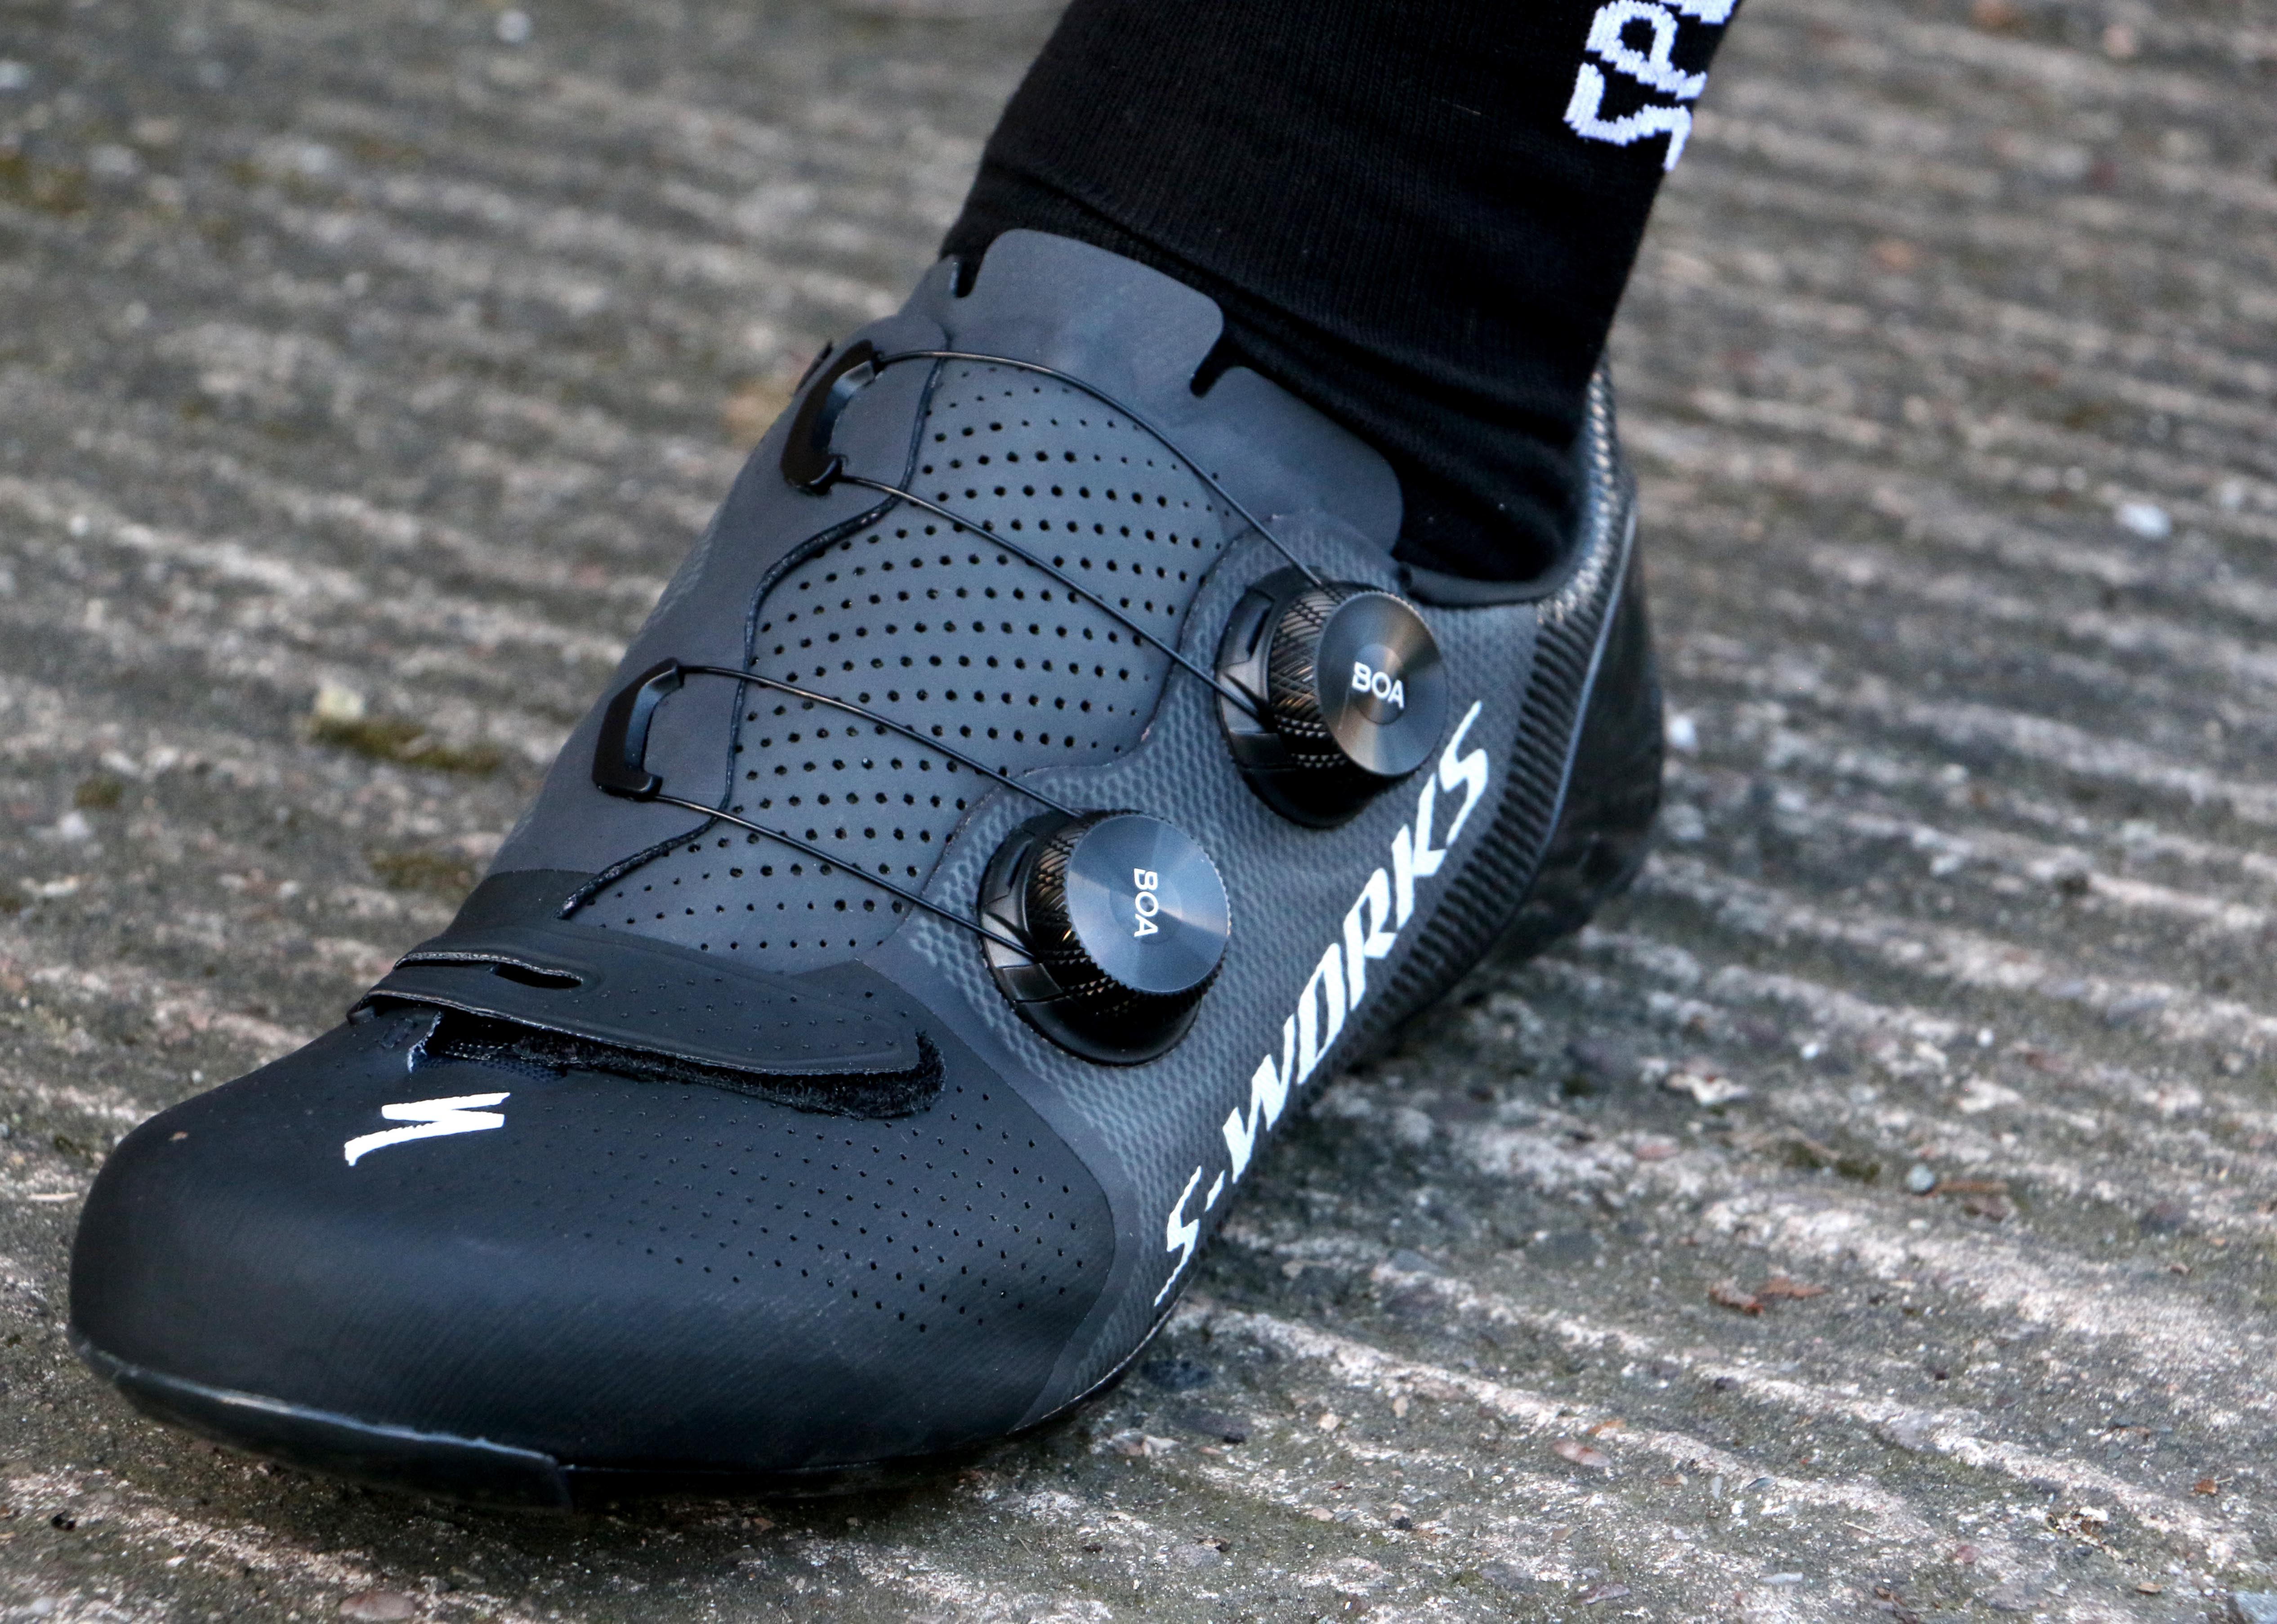 Specialized S-Works 7 Road Shoe Review | Cyclestore Blog